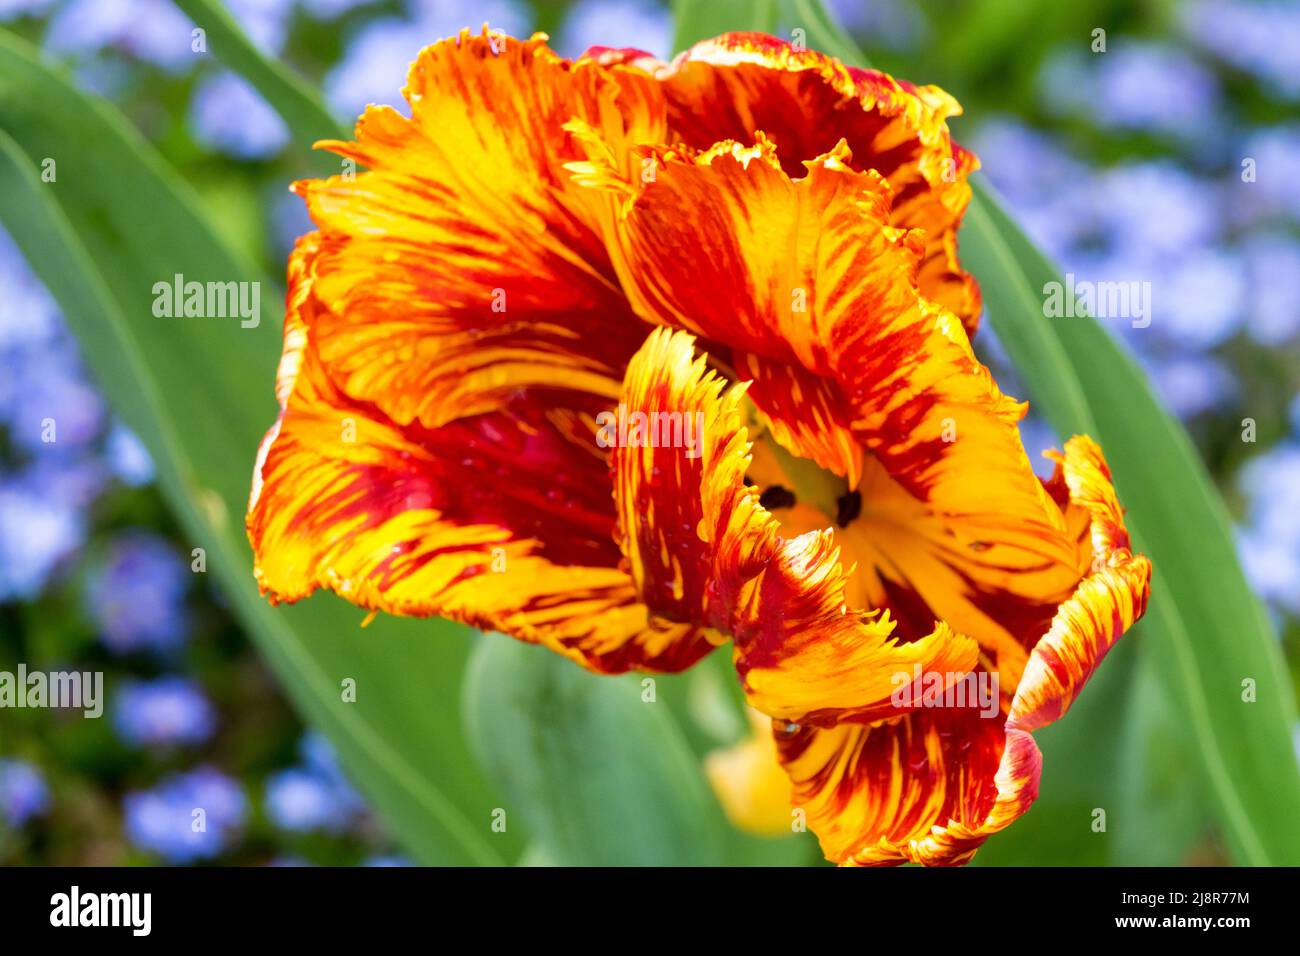 Red yellow tulip brindle flower flaming parrot tulip Stock Photo